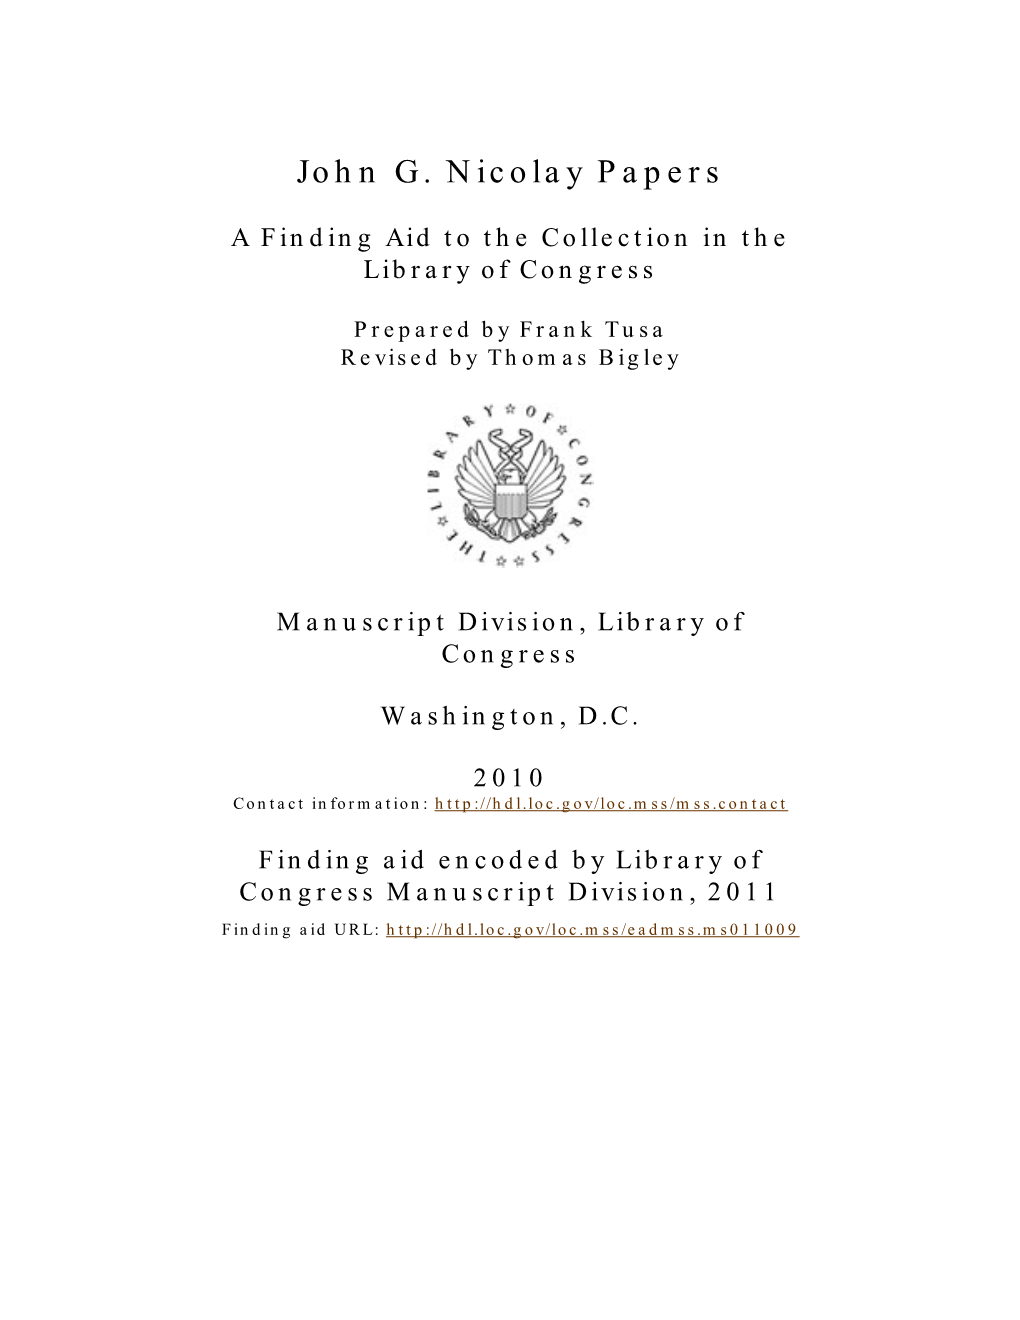 John G. Nicolay Papers [Finding Aid]. Library Of